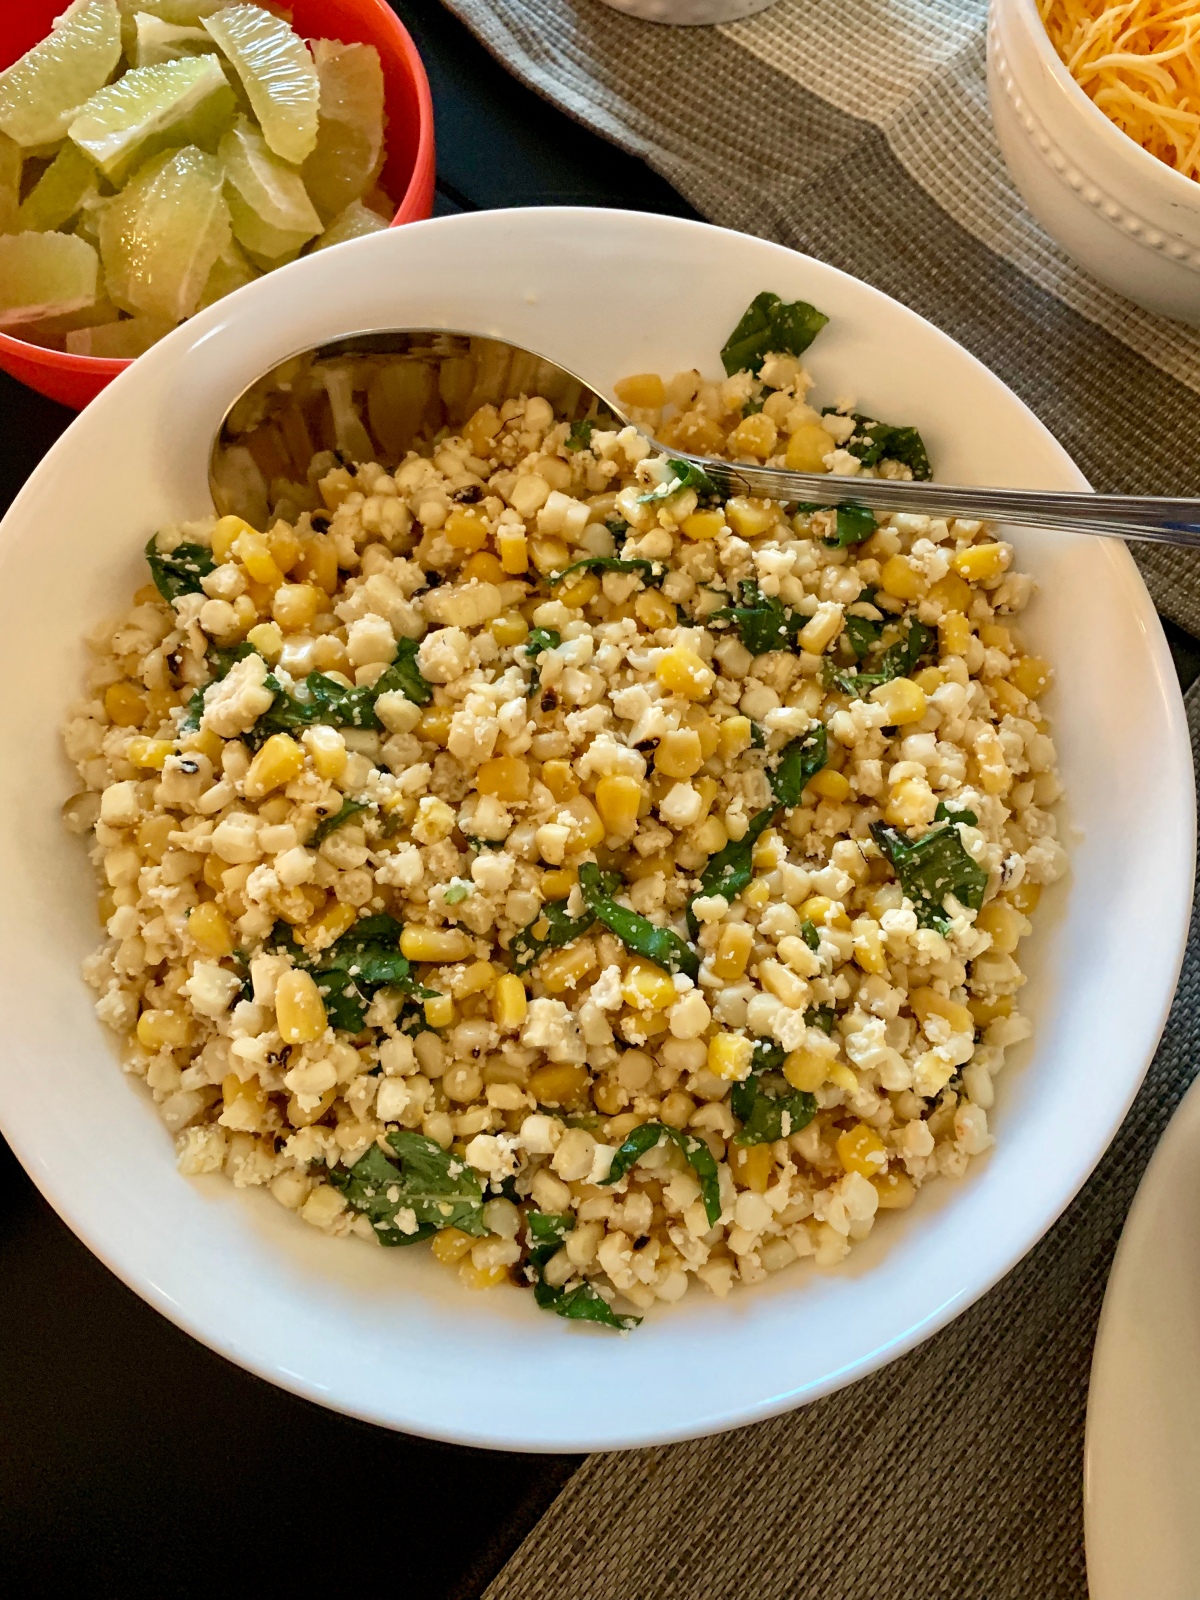 Taco Salad Bar and Grilled Street Corn Salad with Basil and Cotija Cheese